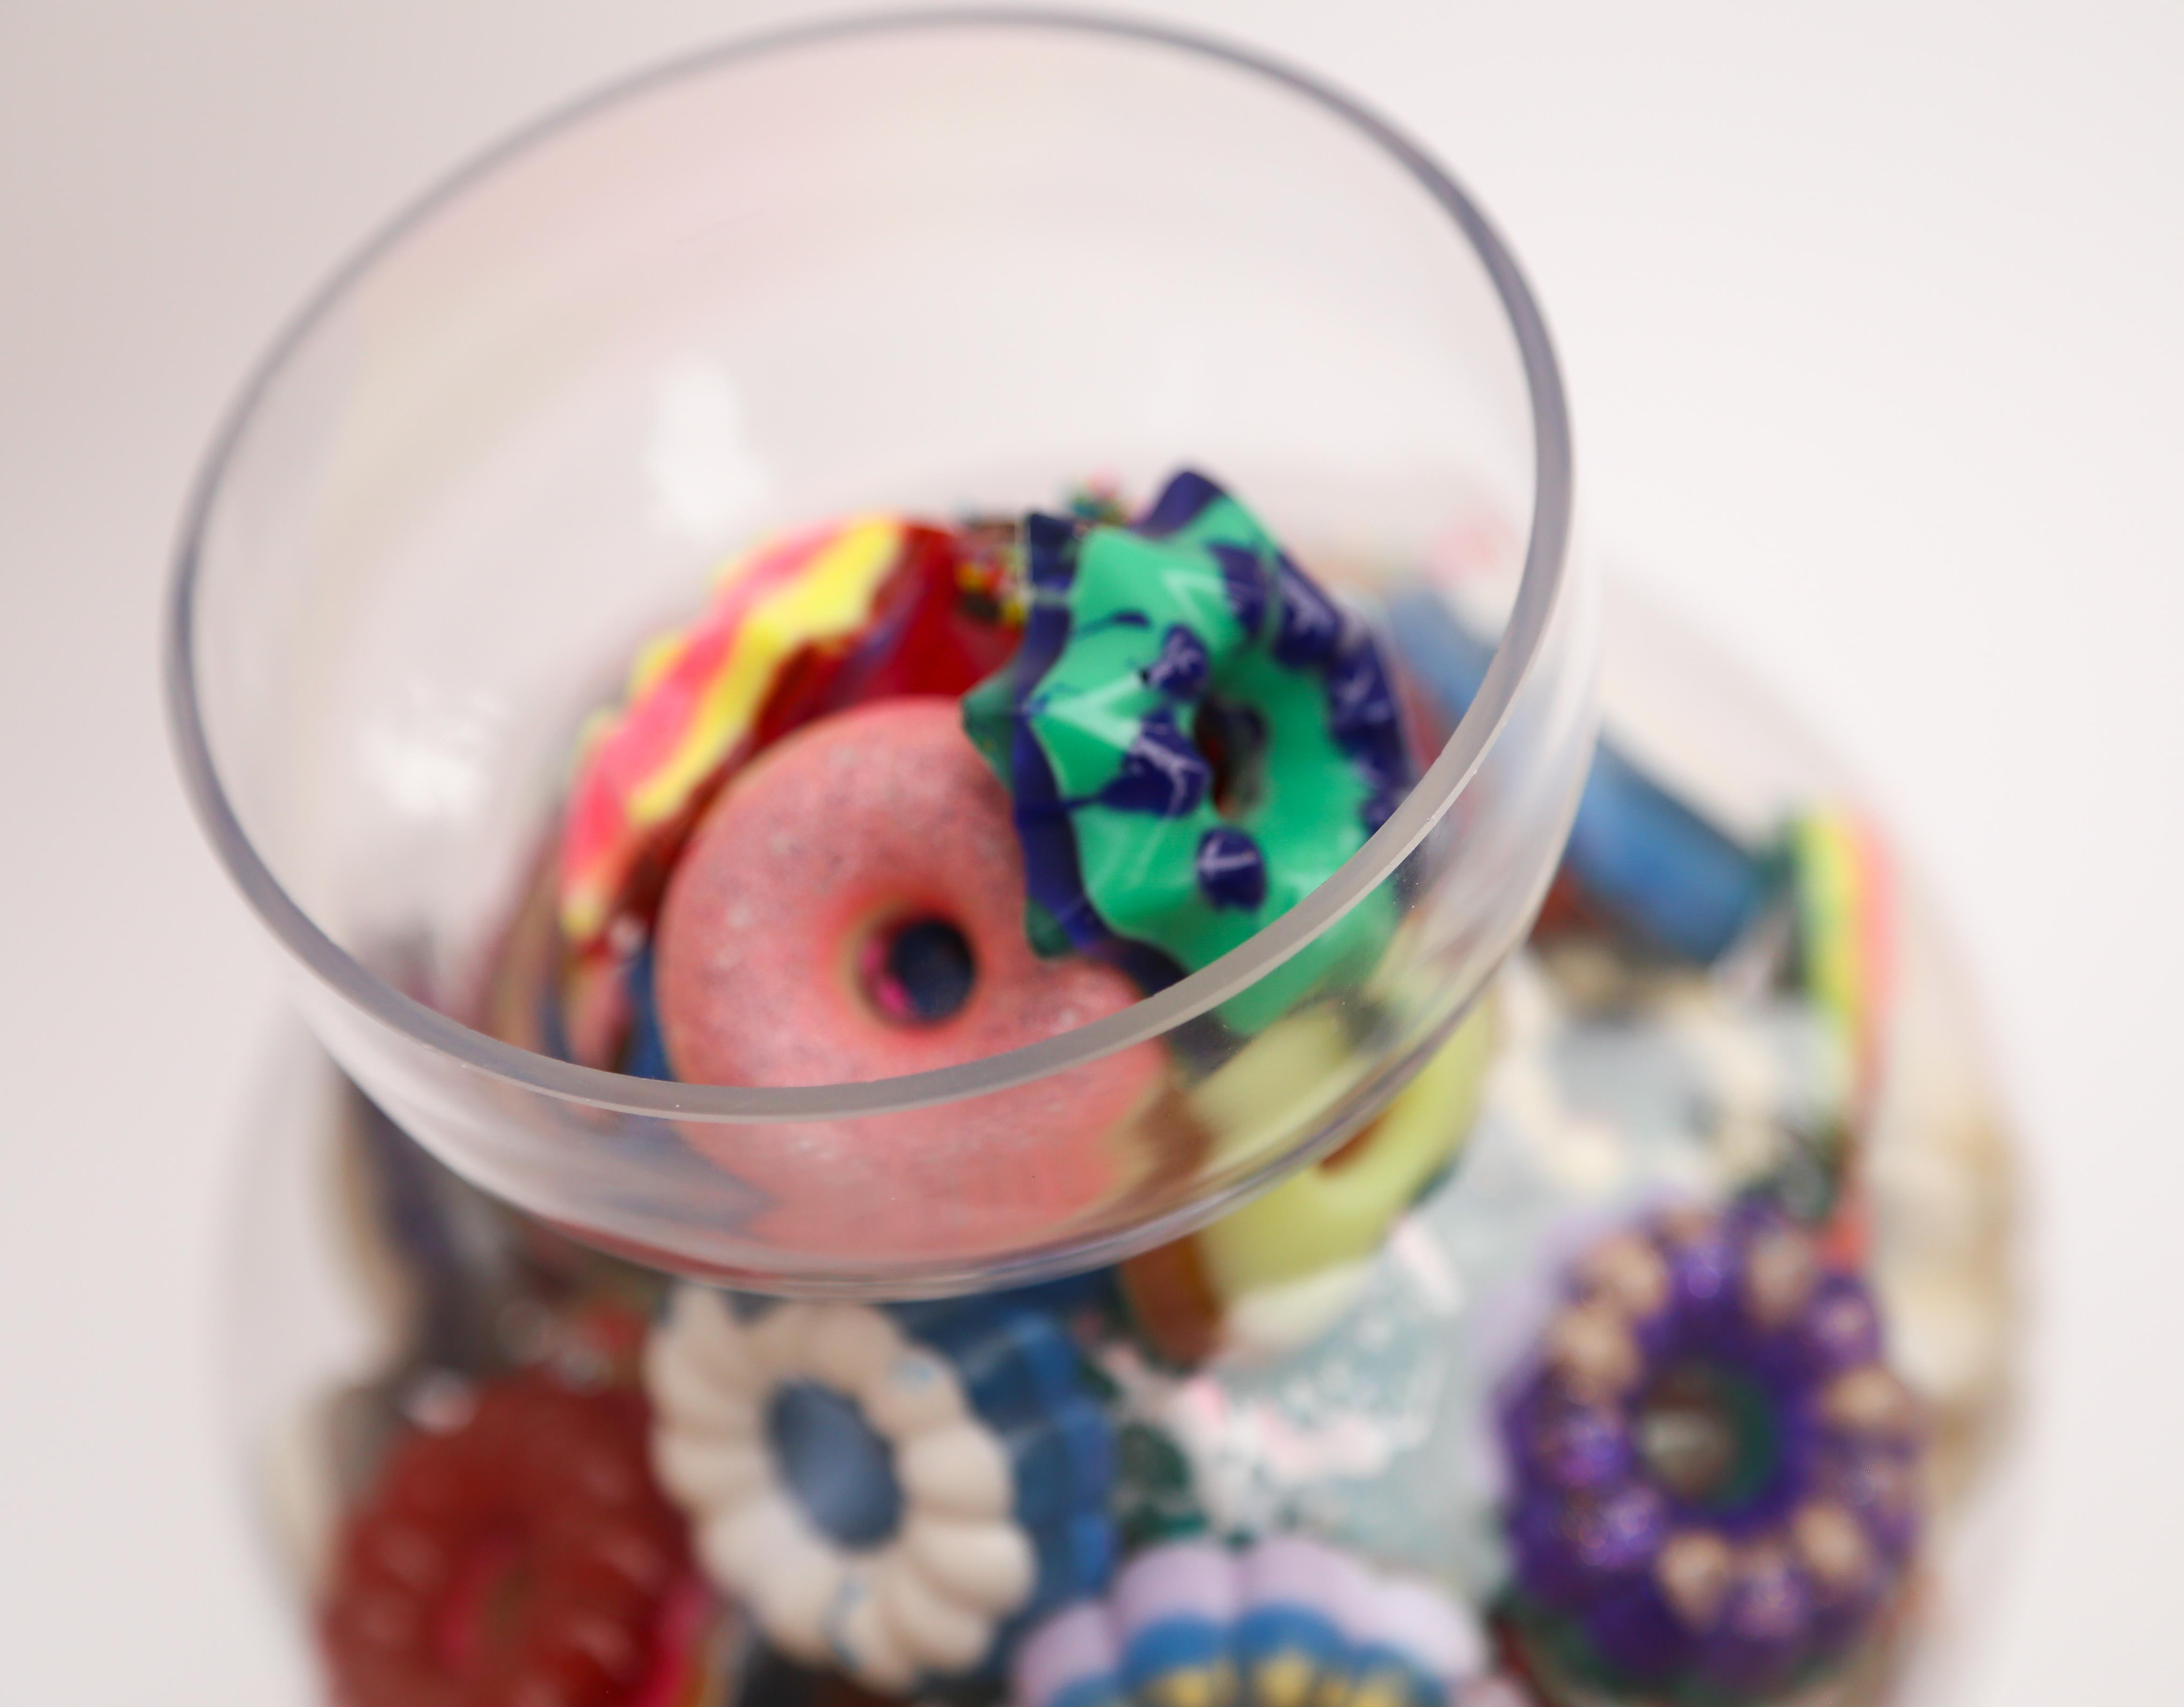 This is a glass candy jar filled with handmade resin donuts by Betsy Enzensberger. The donuts are loose and can be rearranged. The glass container can be emptied and cleaned as needed.

Although the artist is known for her melting popsicle